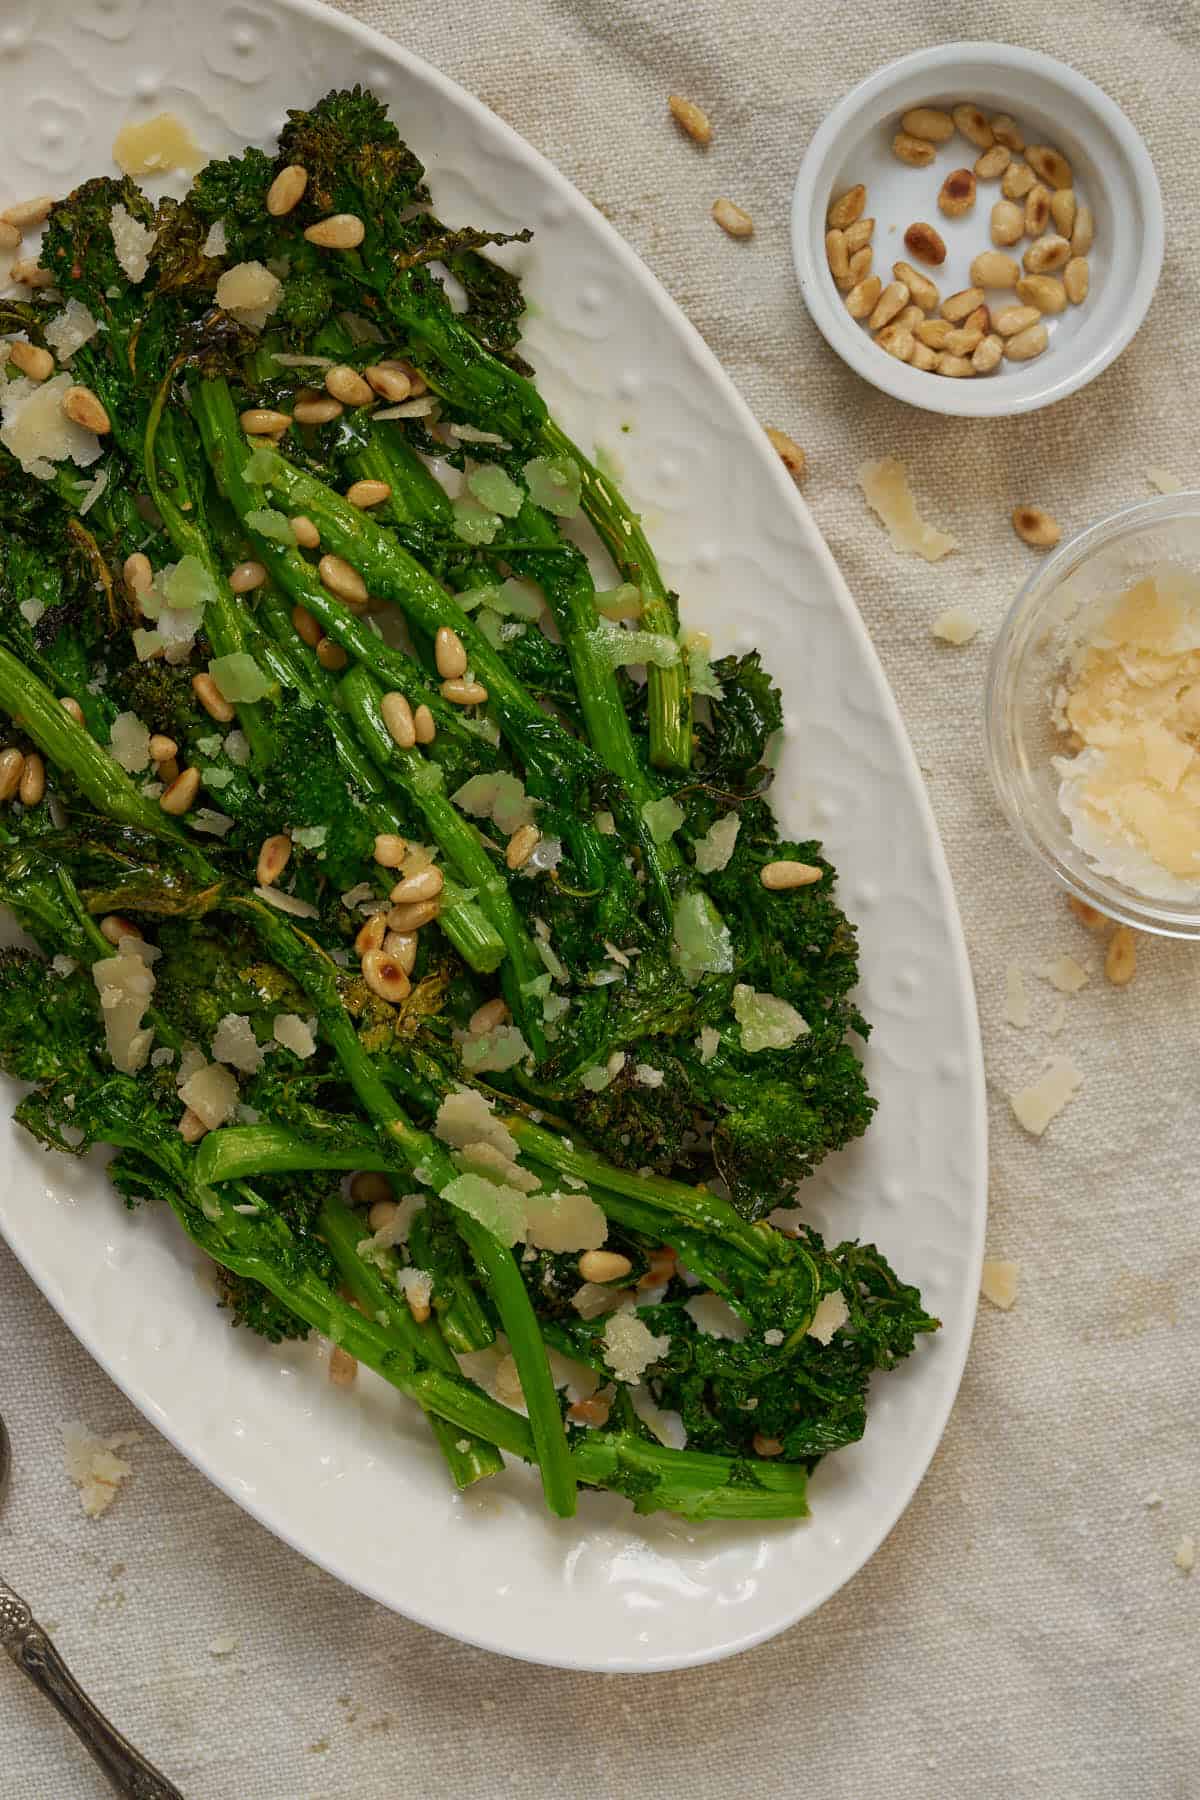 Broccoli rabe in air fryer served with cheese, lemon, and toasted pine nuts.